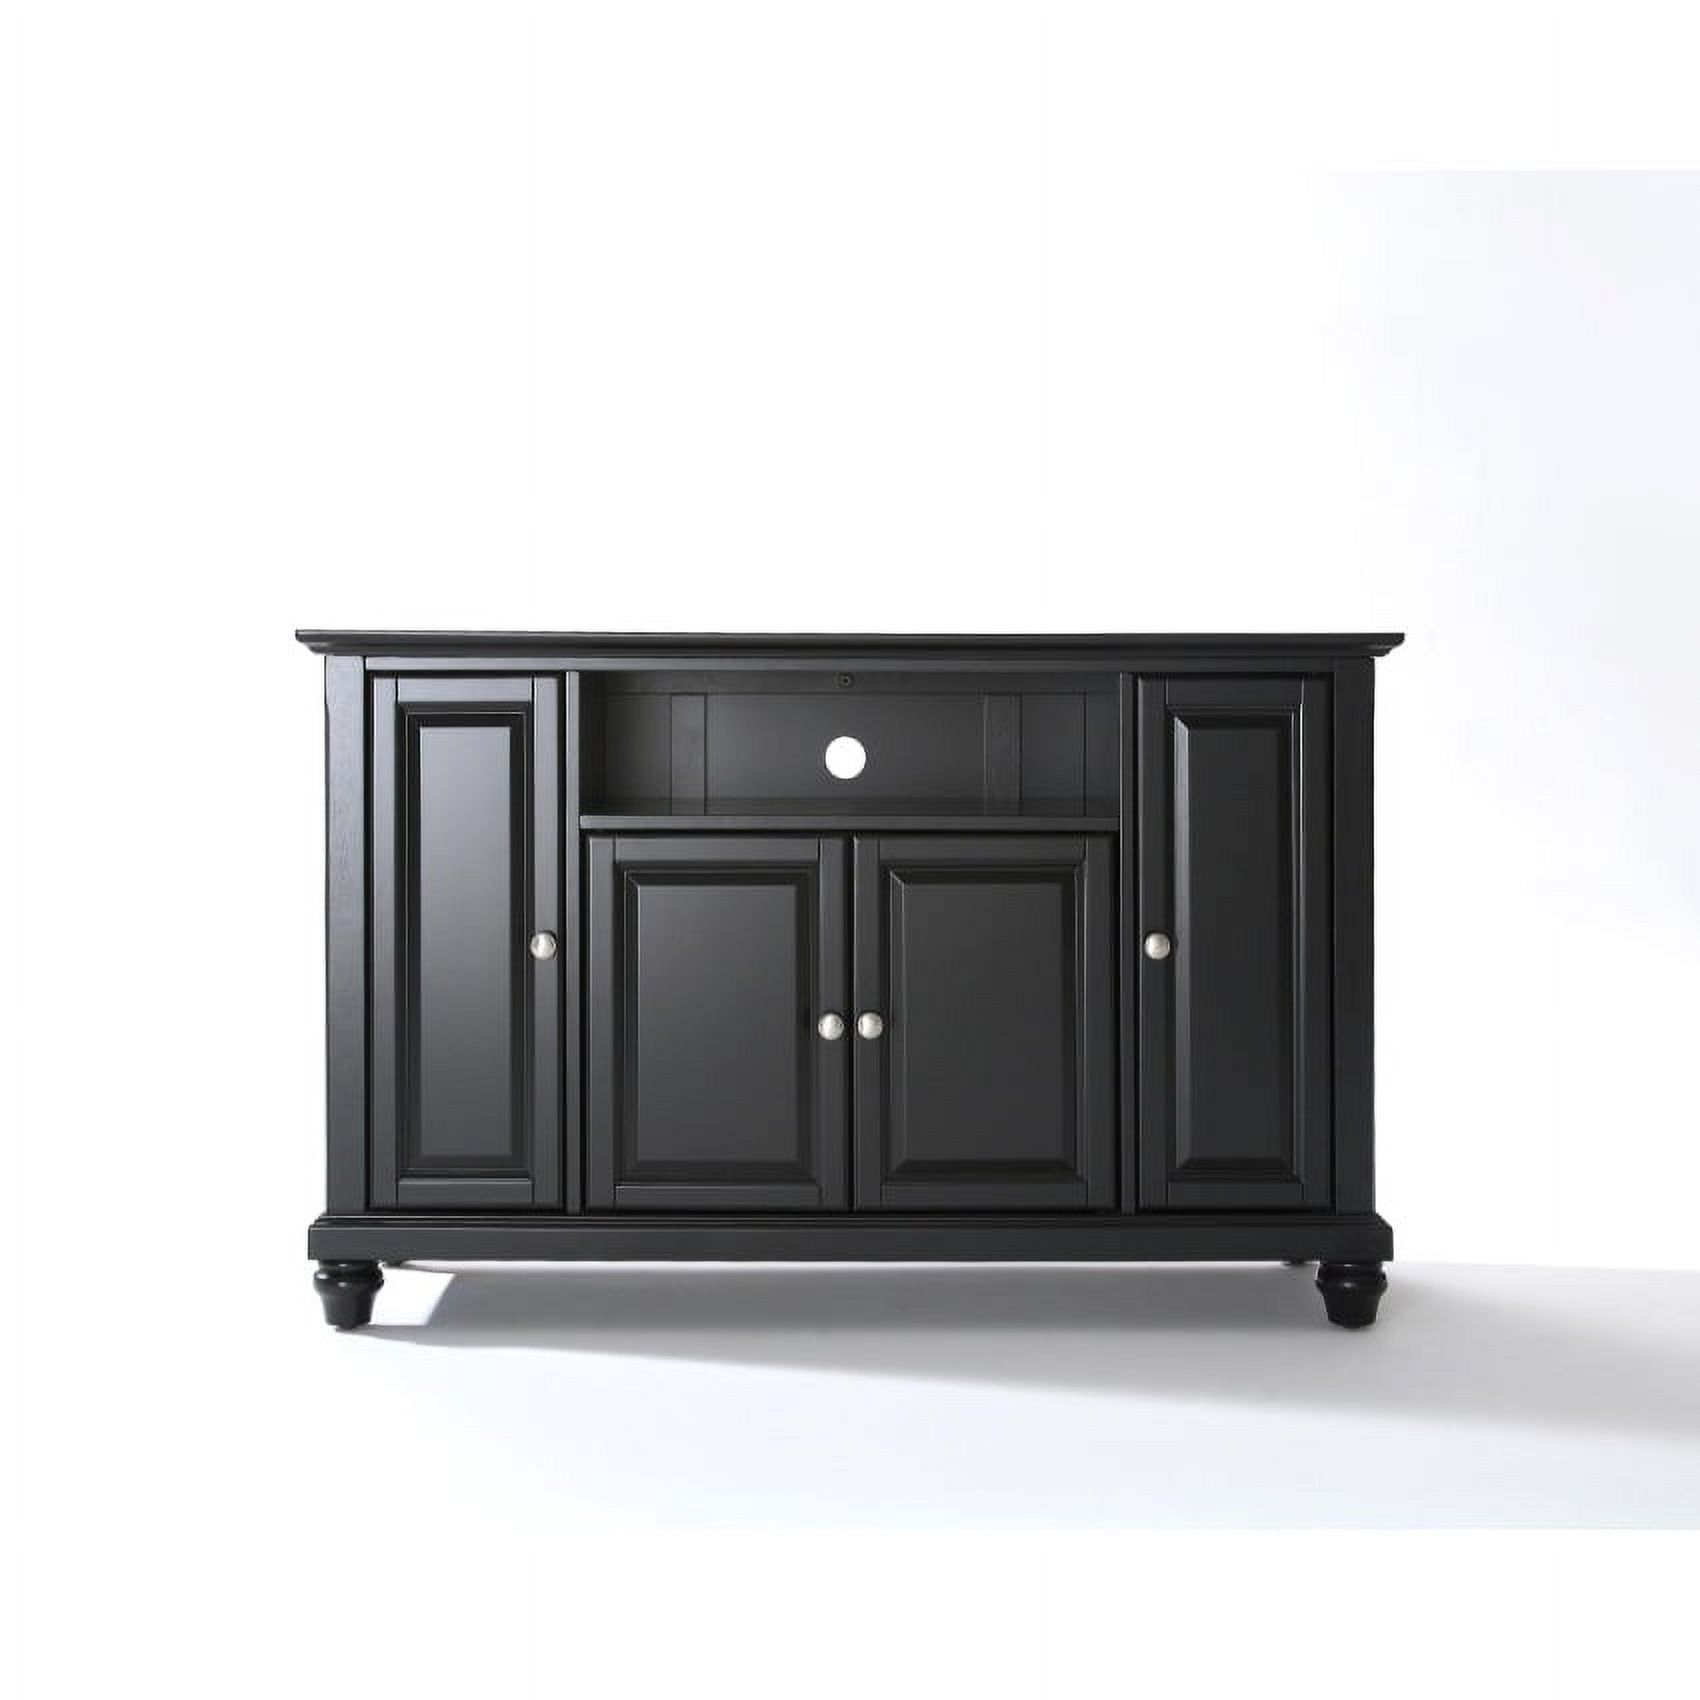 CAMBRIDGE 48" TV STAND IN BLACK FINISH - image 1 of 11